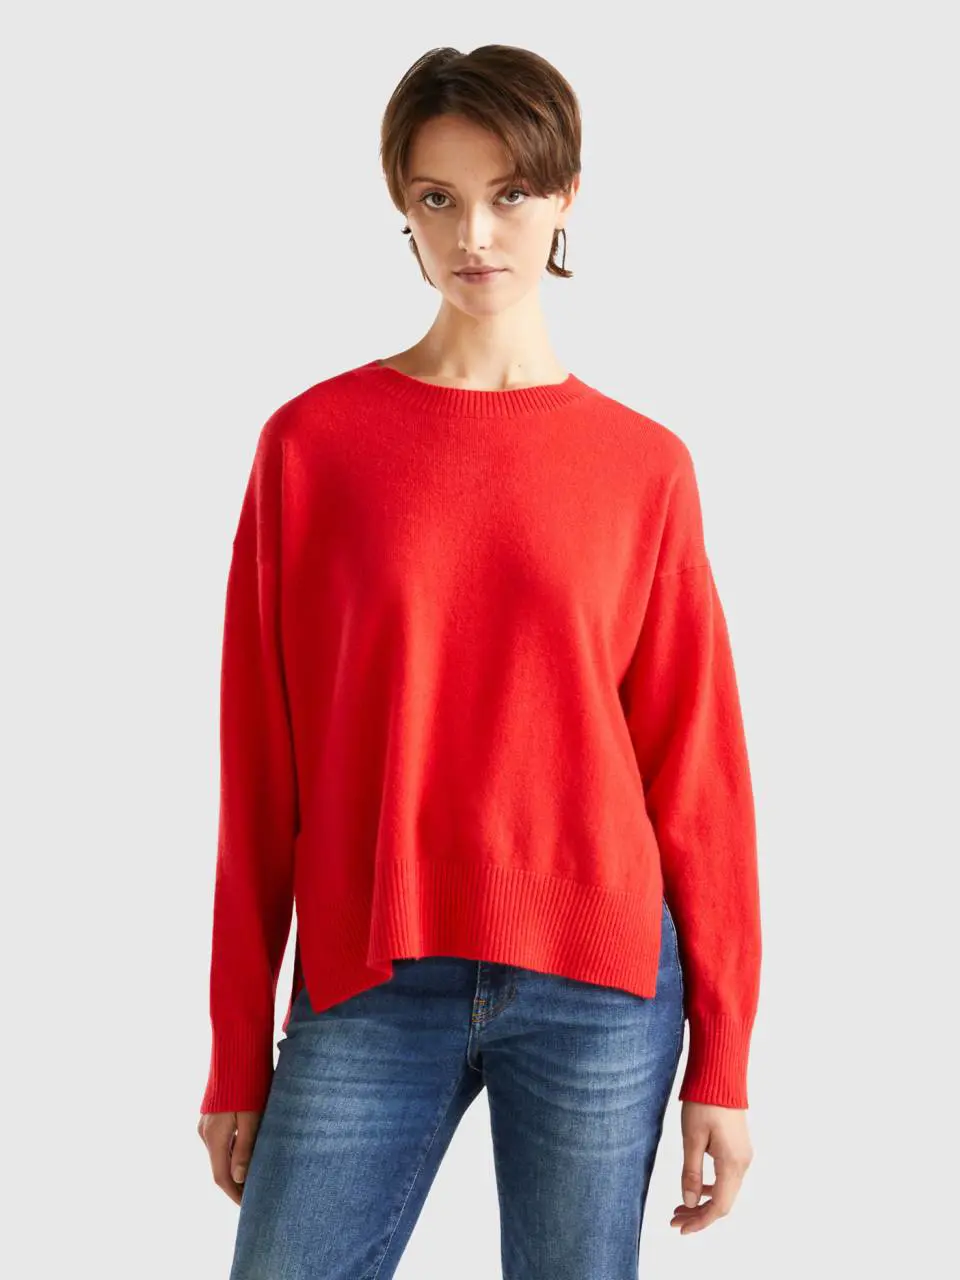 Benetton coral red sweater in 100% cashmere. 1